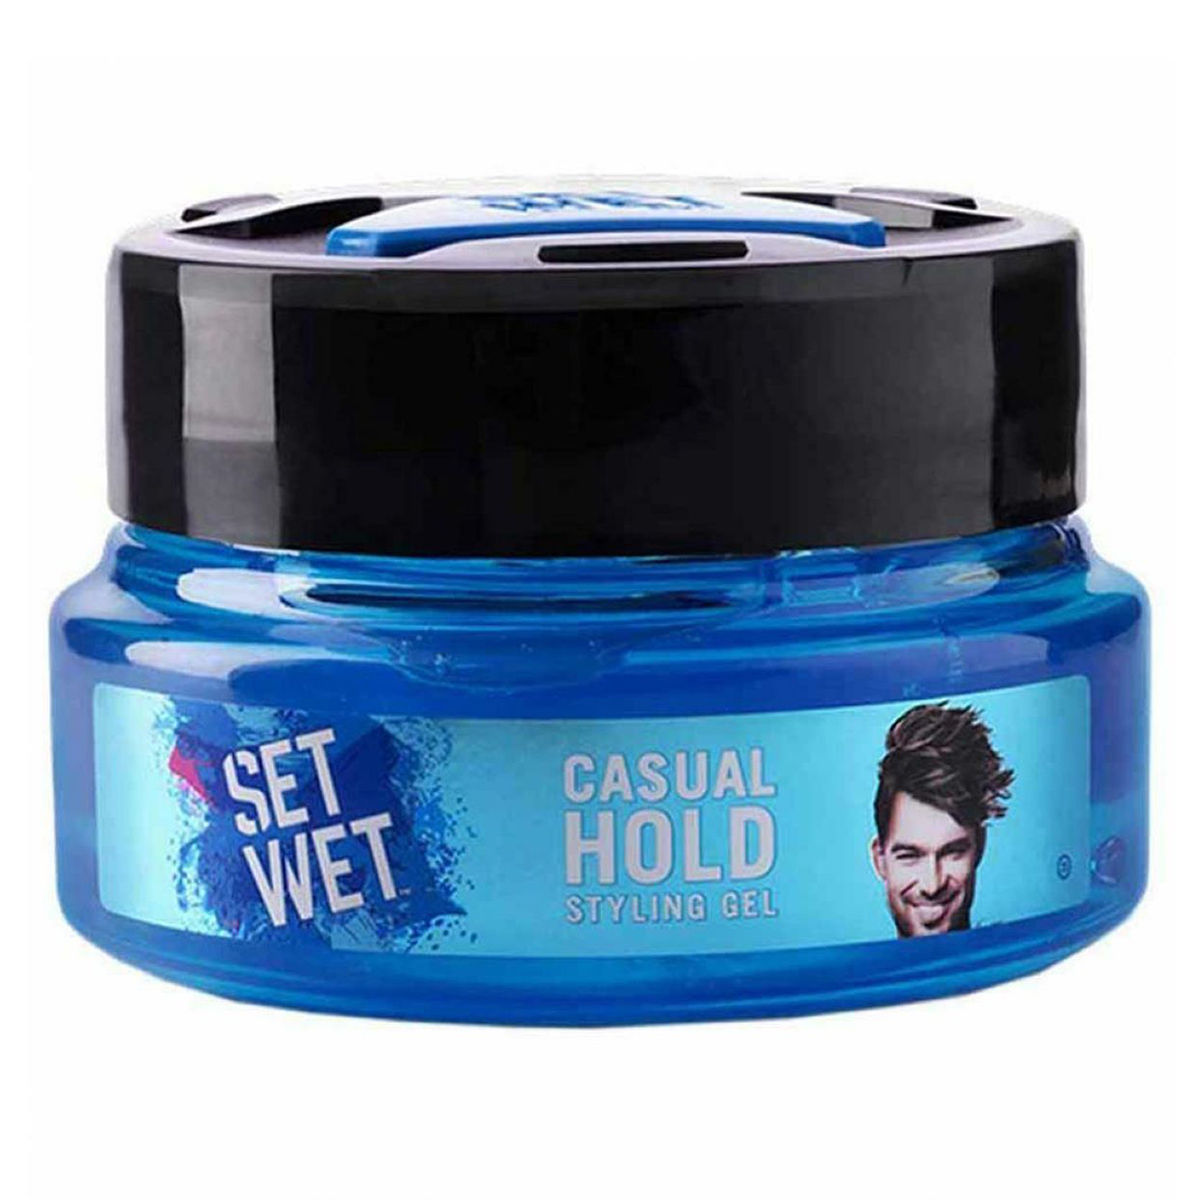 Set Wet Cool Hold Hair Styling Gel, 250 ml | Uses, Benefits, Price ...